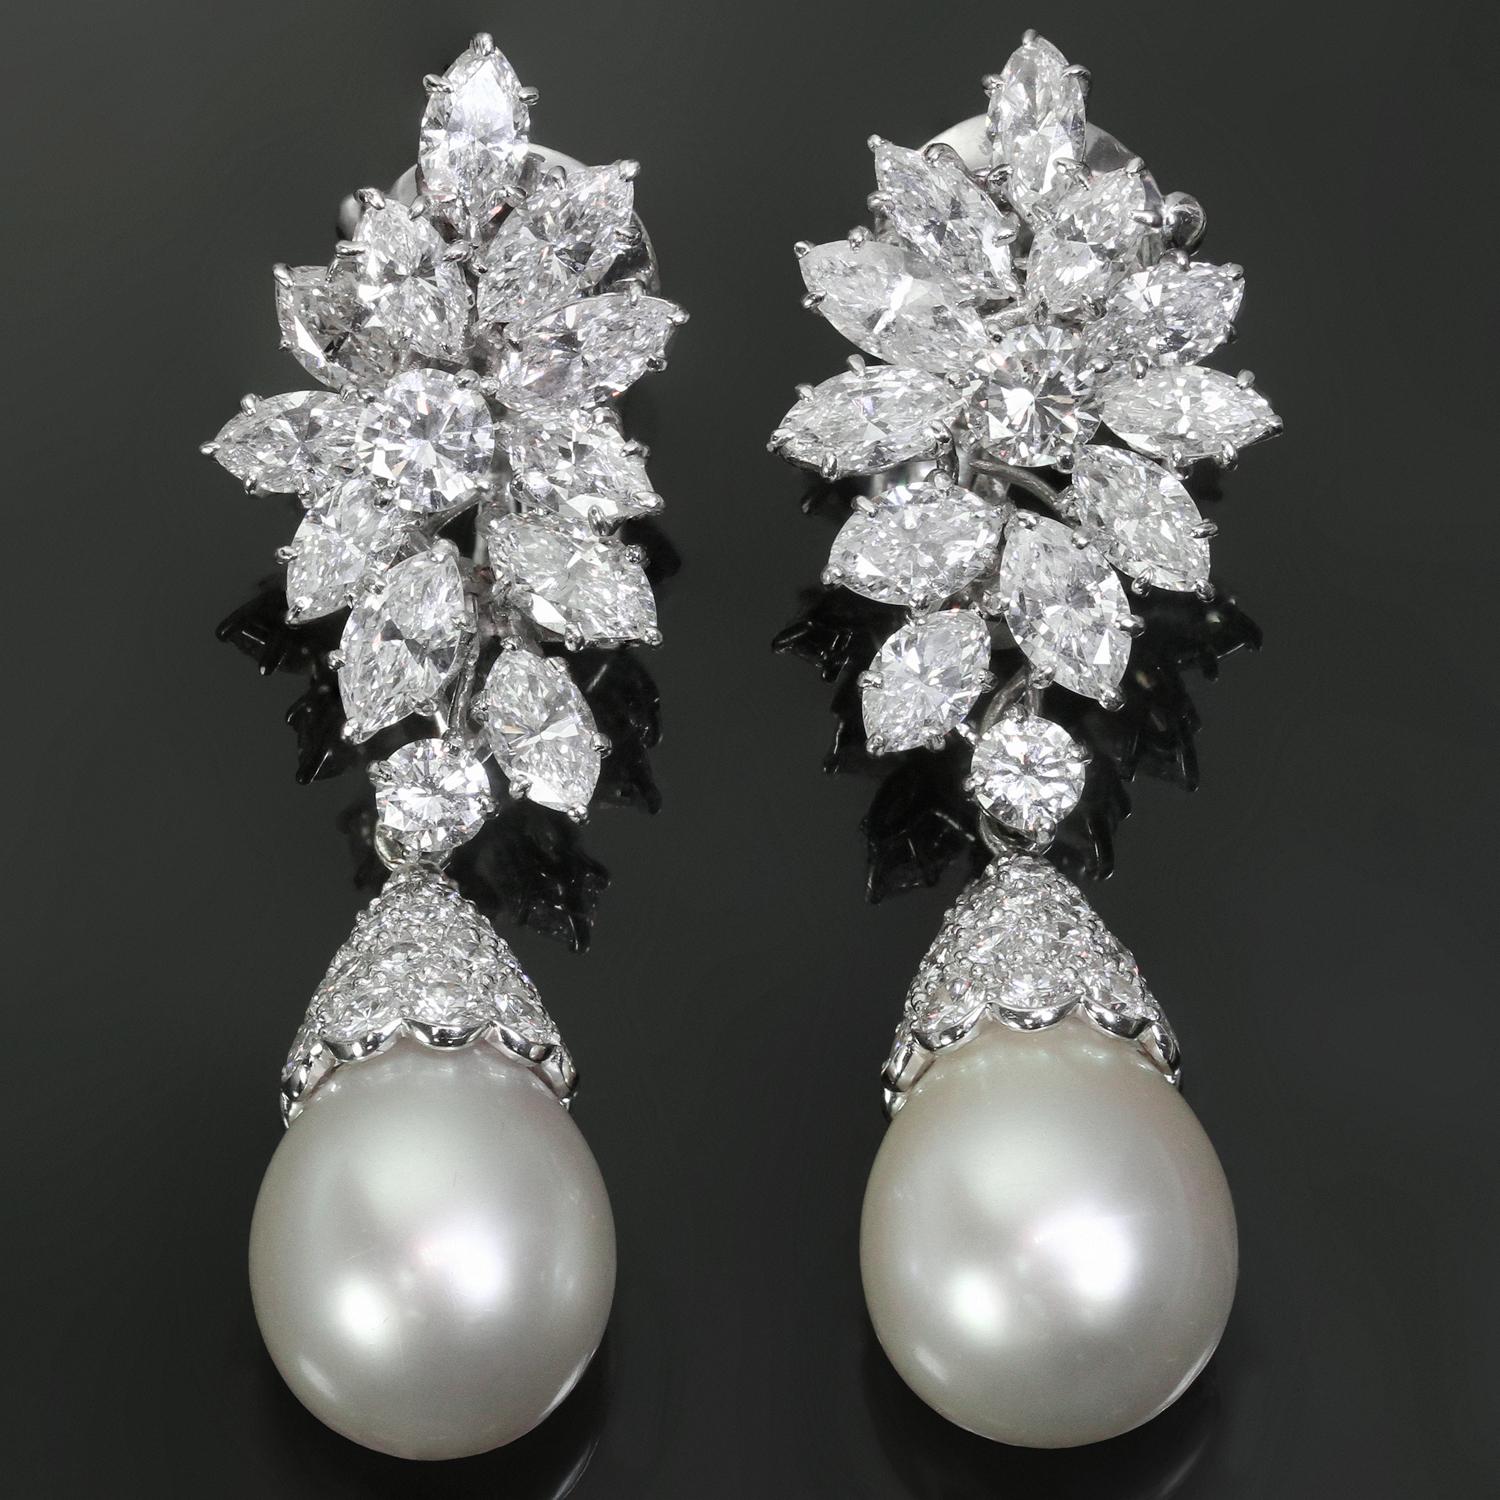 These magnificent vintage Van Cleef & Arpels clip-on earrings are crafted in platinum and feature gorgeous detachable drops. The earrings are set with 2 round diamonds weighing an estimated 1.0 carat, 2 smaller round diamonds weighing an estimated